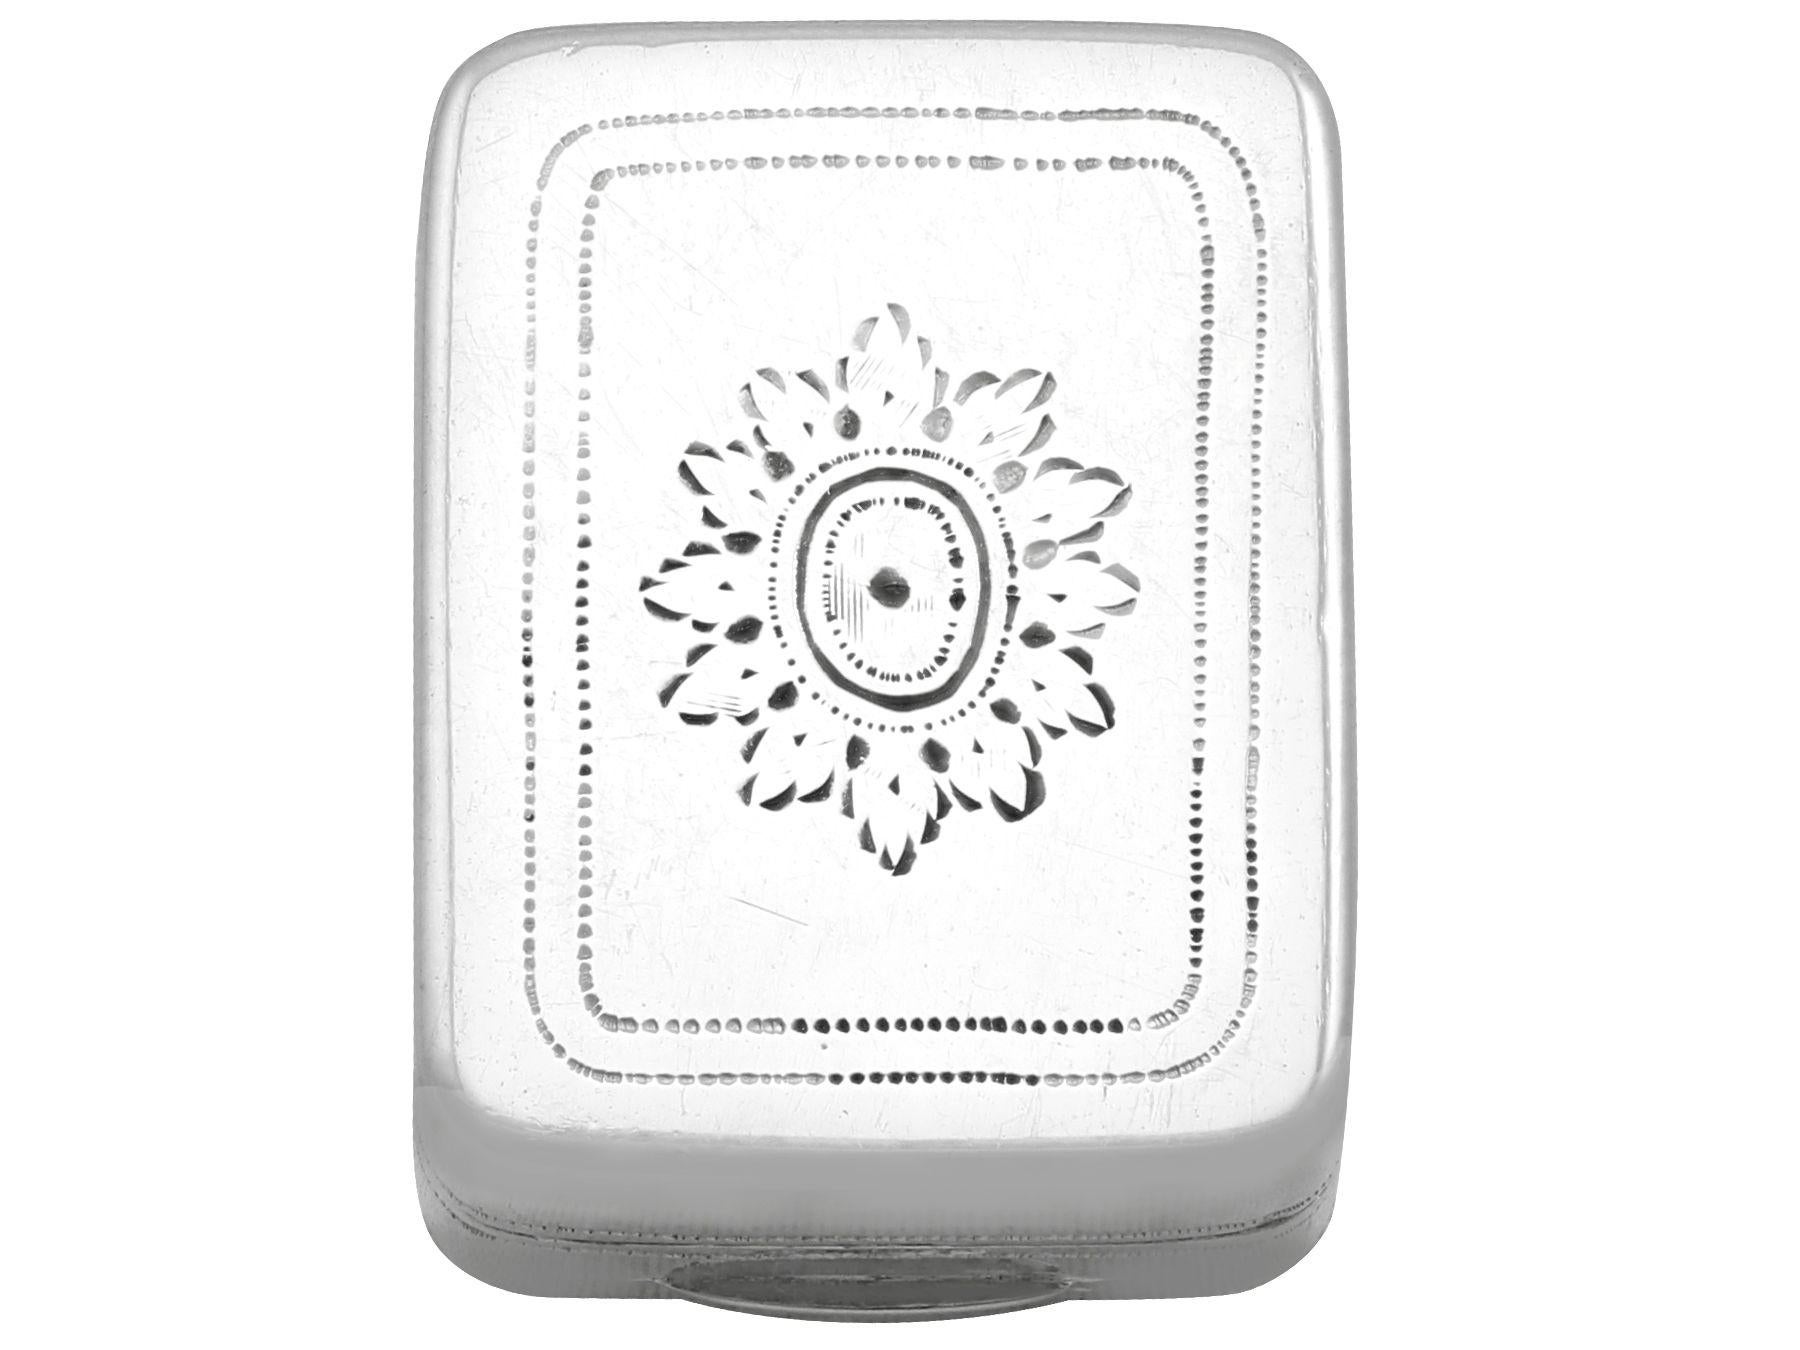 An exceptional, fine and impressive, rare antique George III English sterling silver vinaigrette; an addition to our silver boxes collection

This antique Georgian silver vinaigrette, in sterling standard, has a plain rounded rectangular form.

The